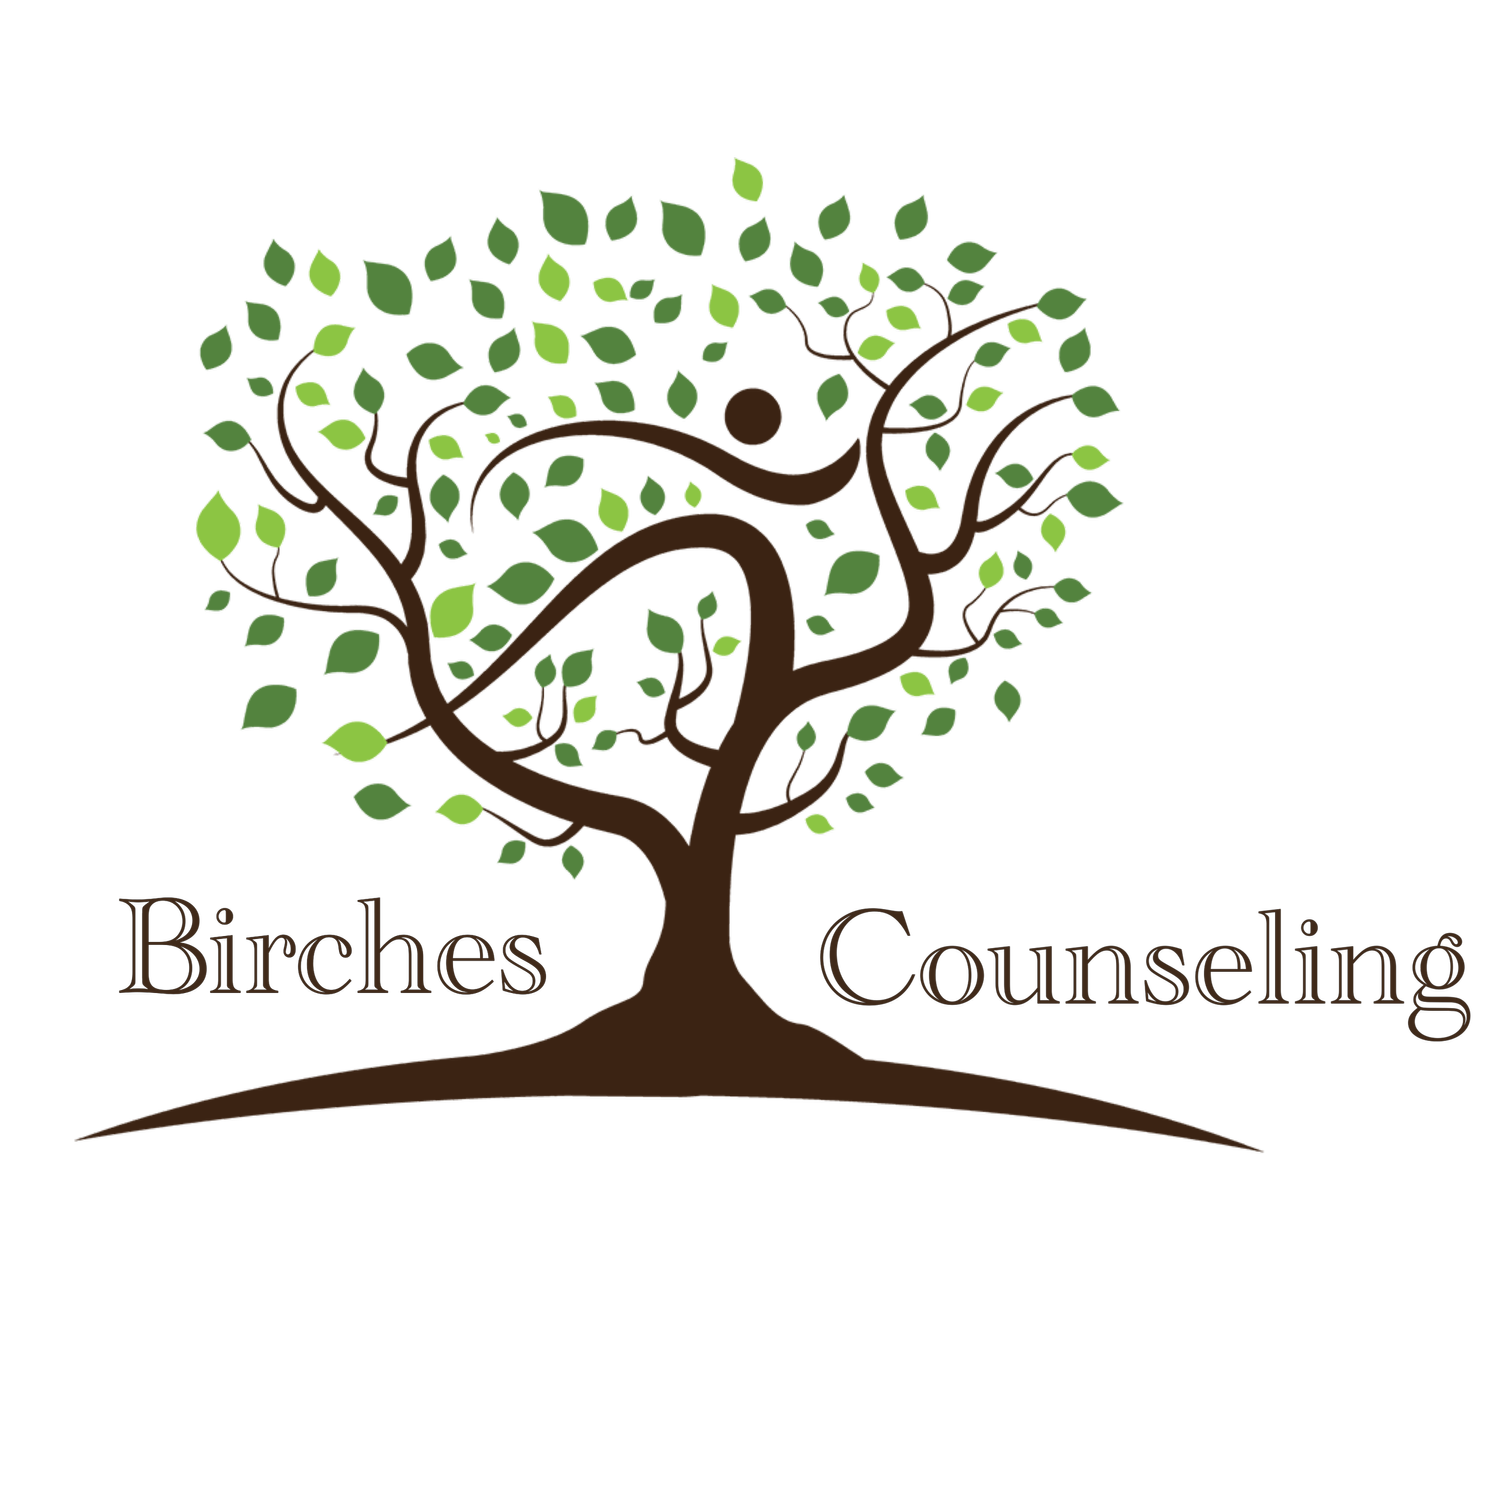 Birches Counseling